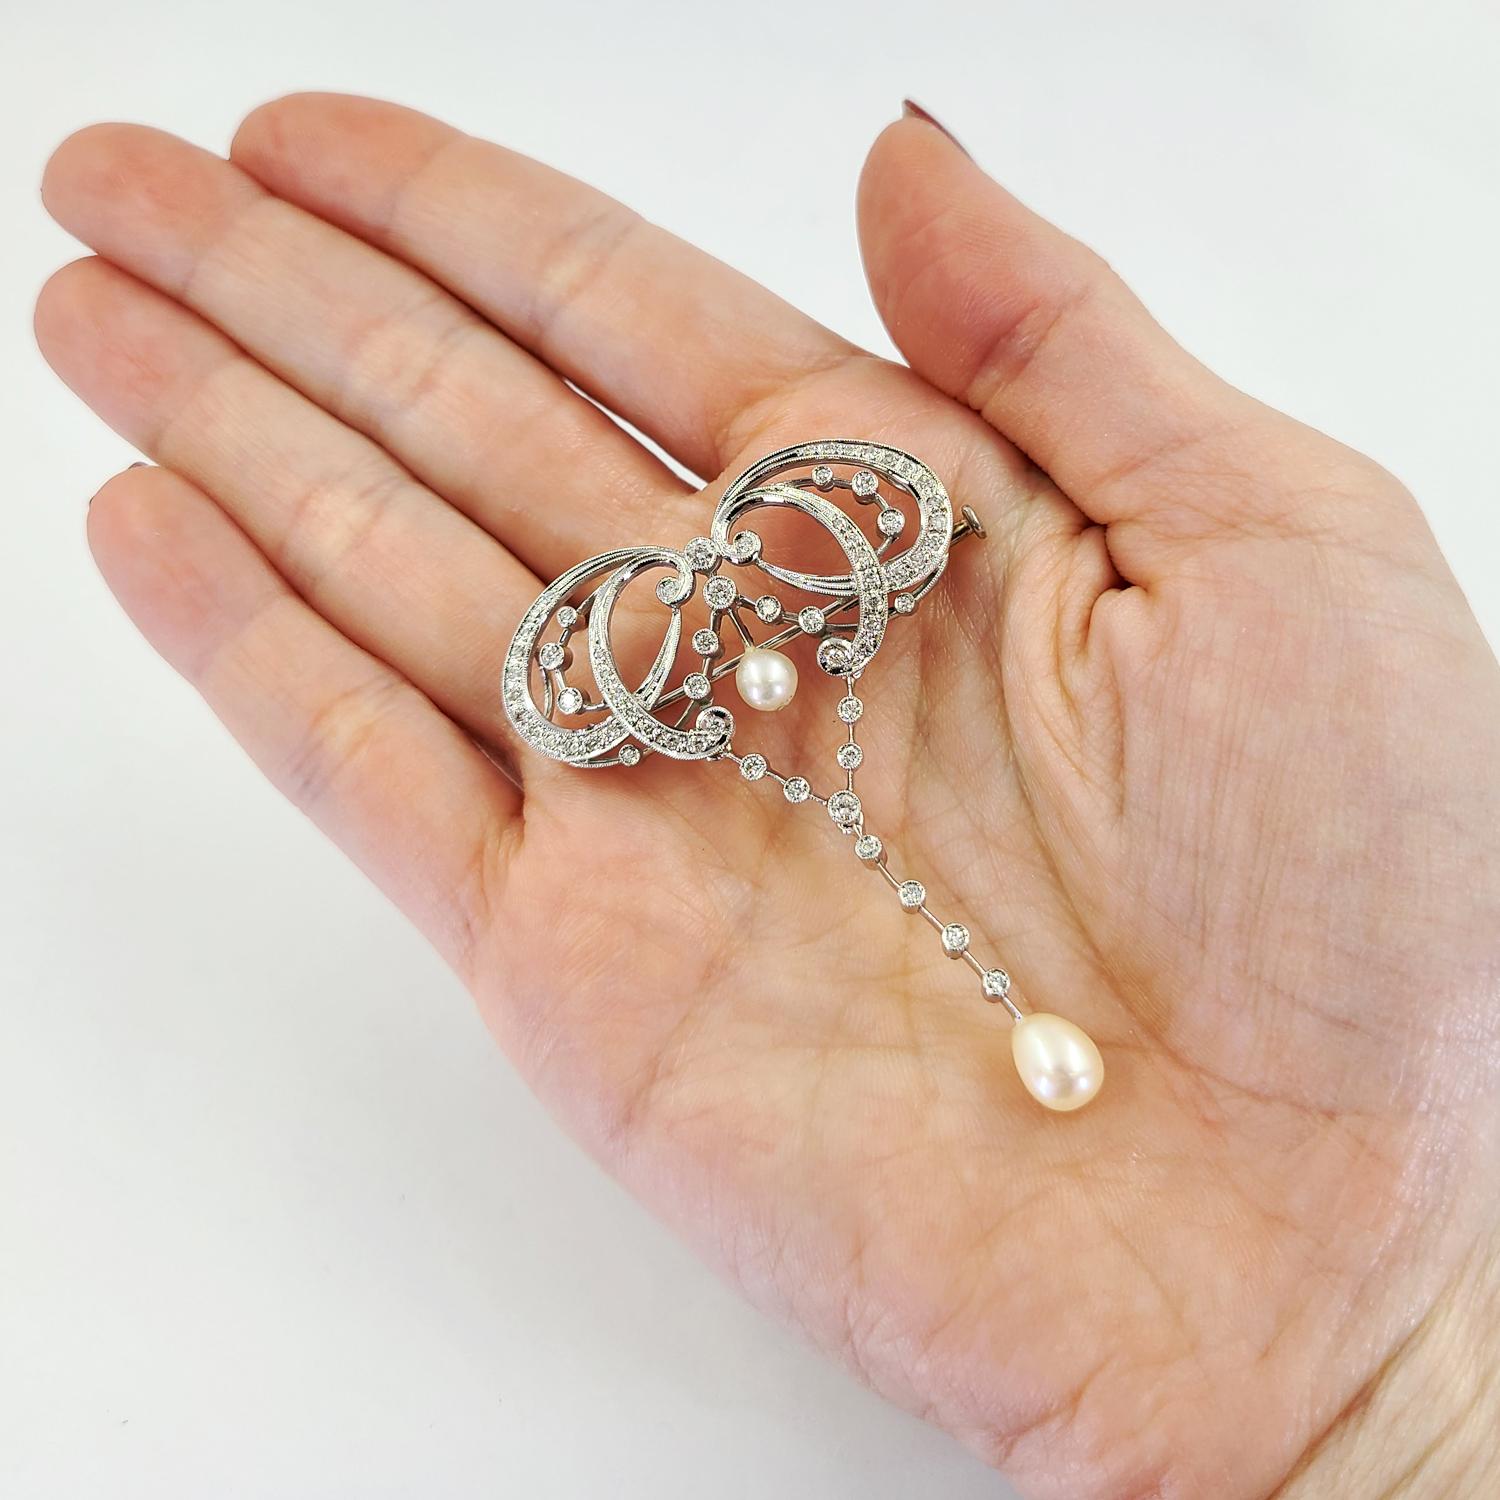 14 Karat White Gold Convertible Pin & Slide Pendant Featuring 63 Round Brilliant Cut Diamonds Of VS Clarity & G/H Color Totaling Approximately 1.00 Carat & 2 Cultured Drop Pearls. 2.5 Inch Length. Finished Weight Is 10.4 Grams. Antique Reproduction.